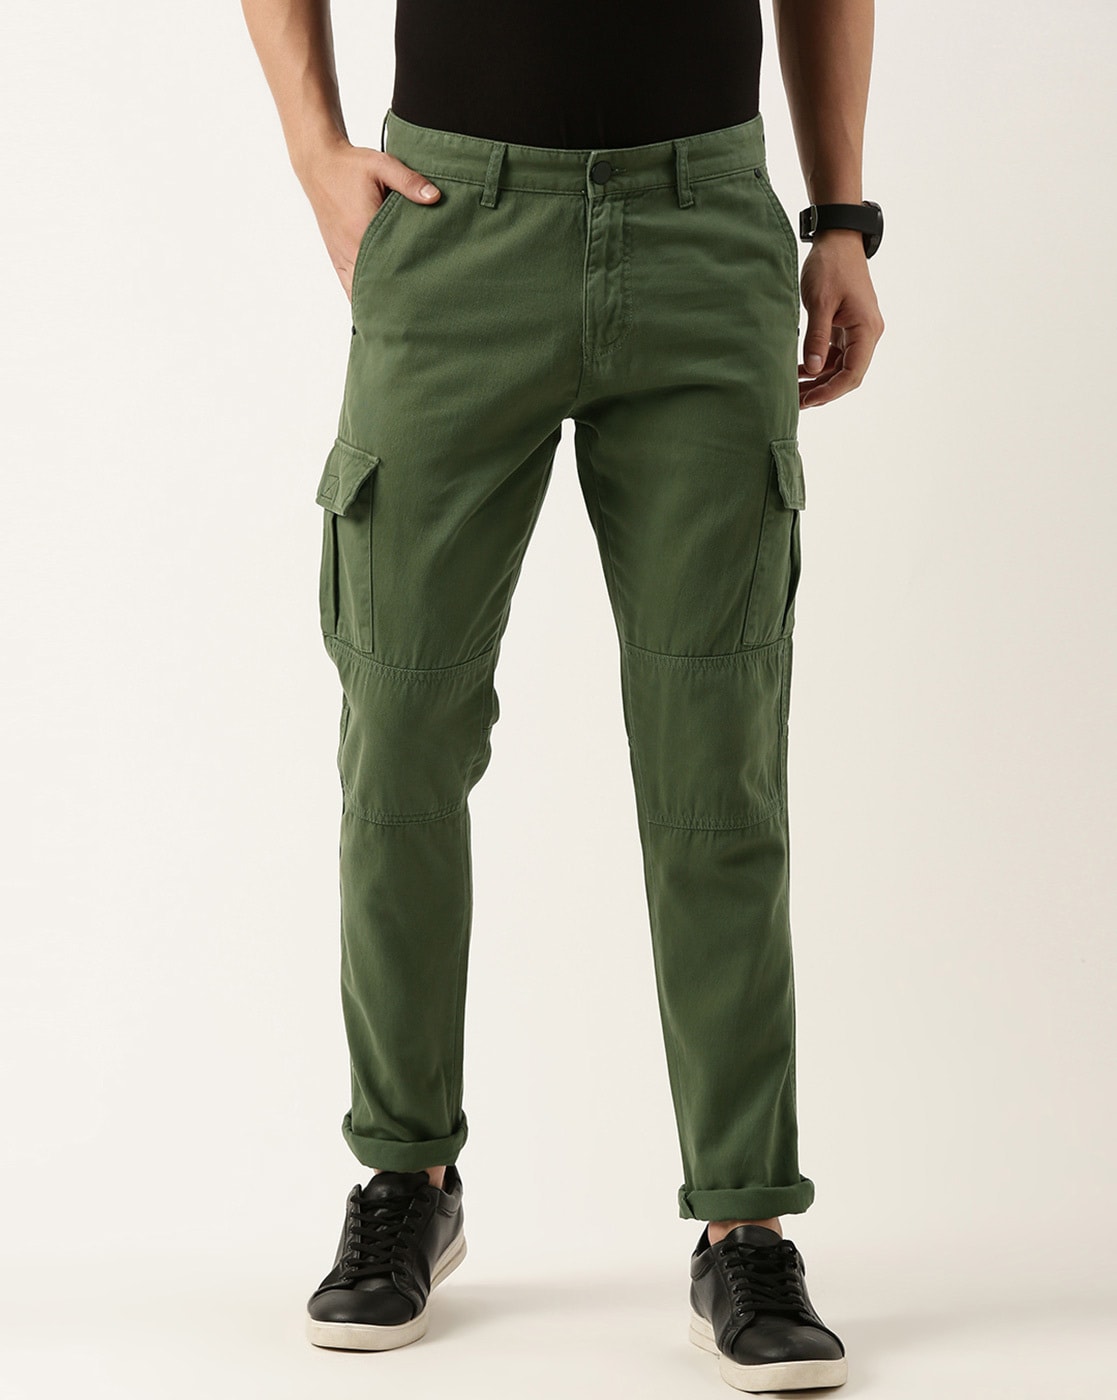 Womens Elastic Cargo Olive Green Pant | Dovetail Workwear